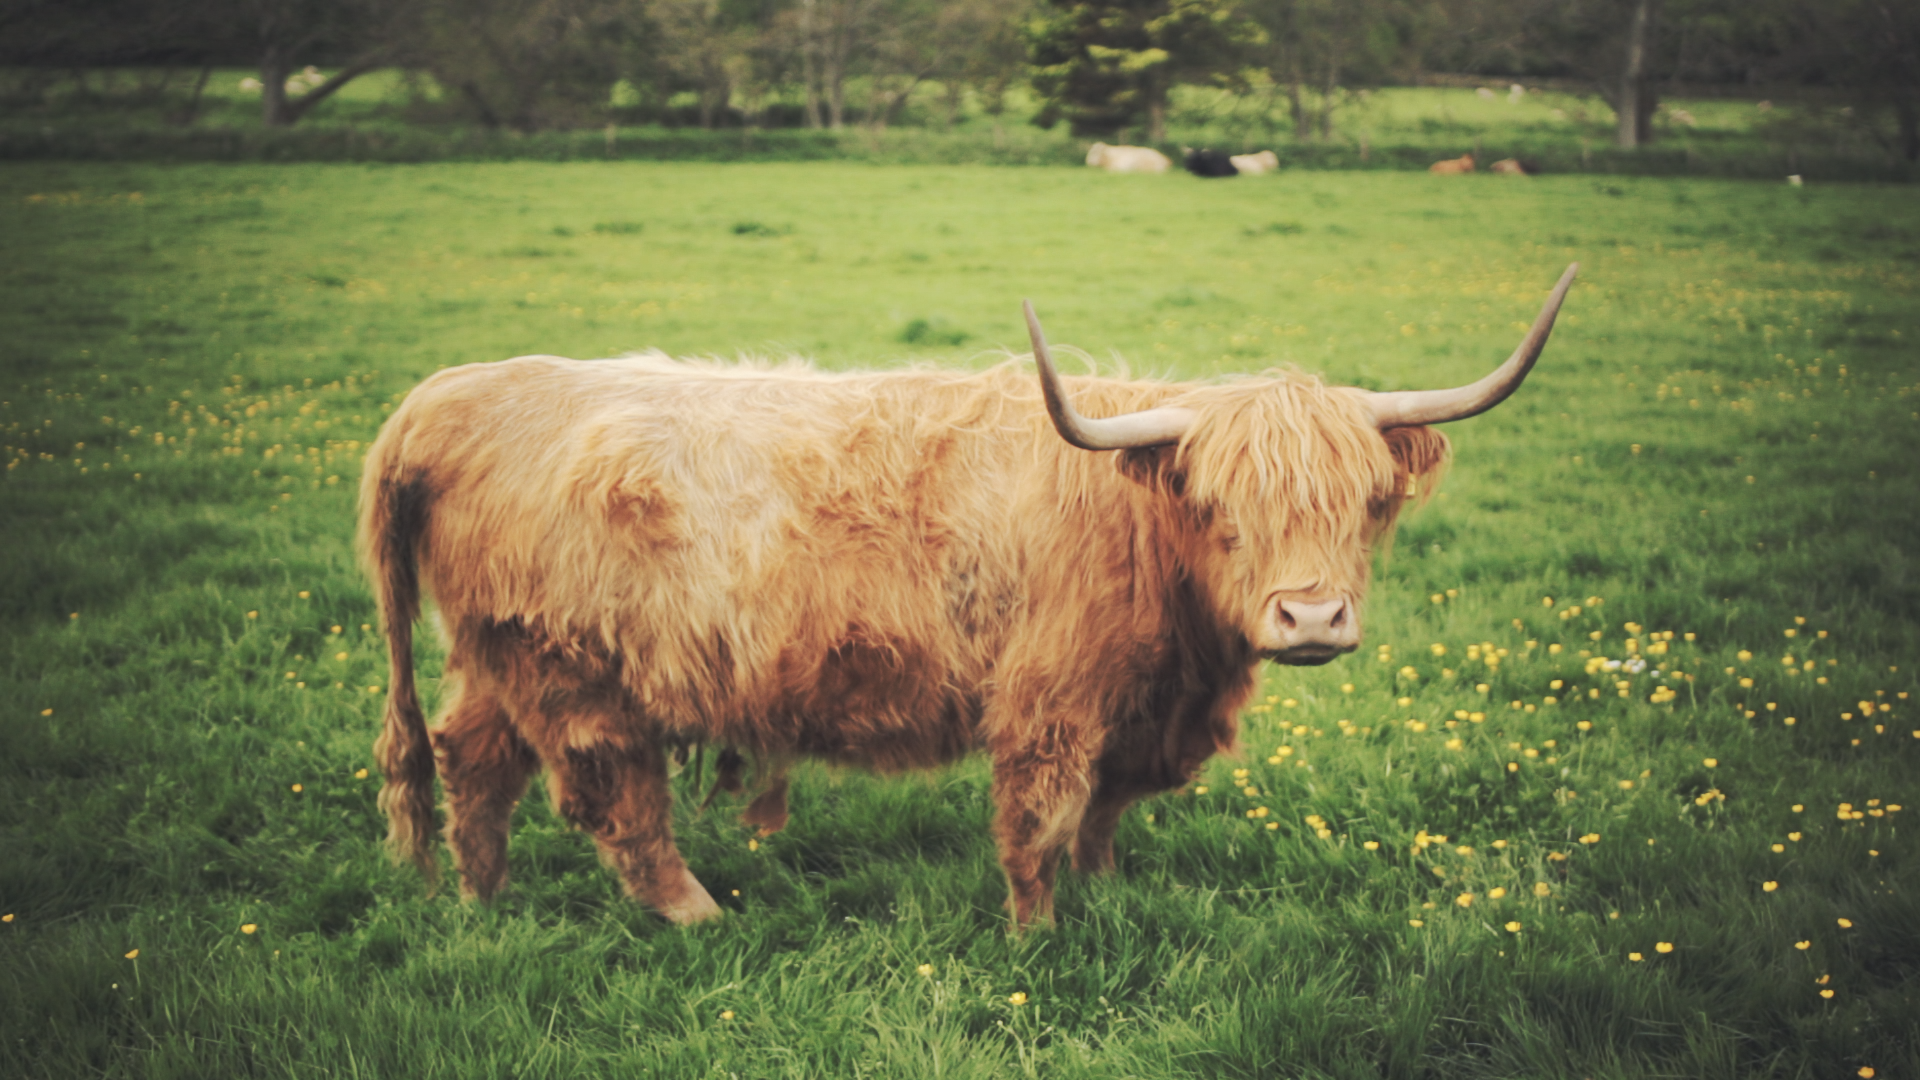 Hairy Coo of Methlick